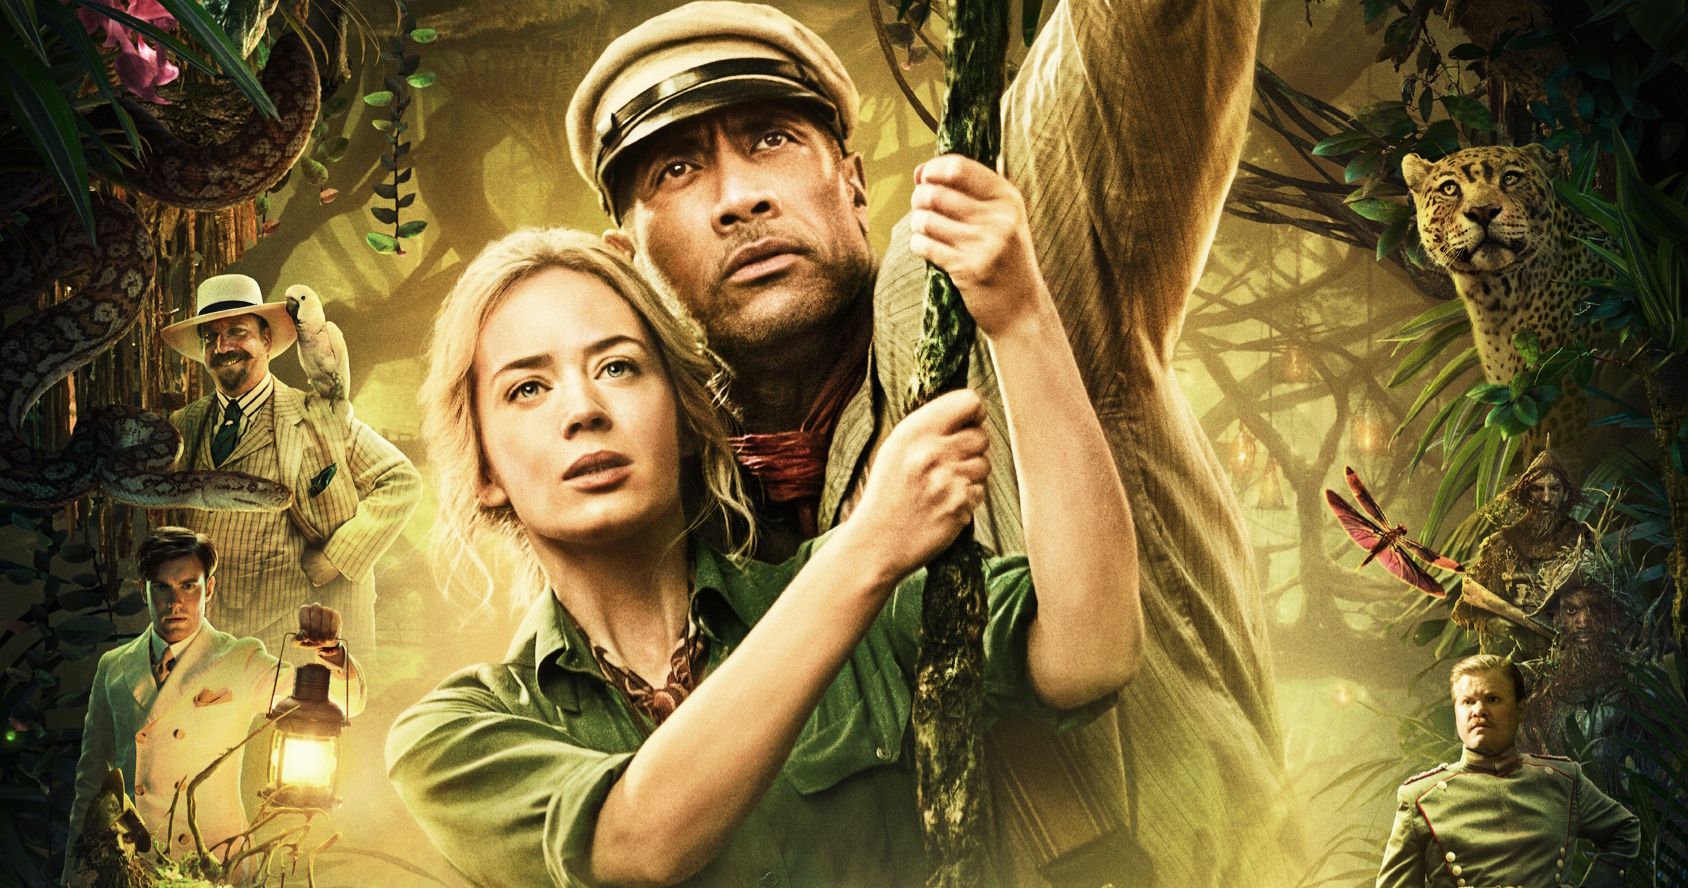 The Rock's Jungle Cruise to Debut on Disney+ Premier Access and in Theaters This Summer